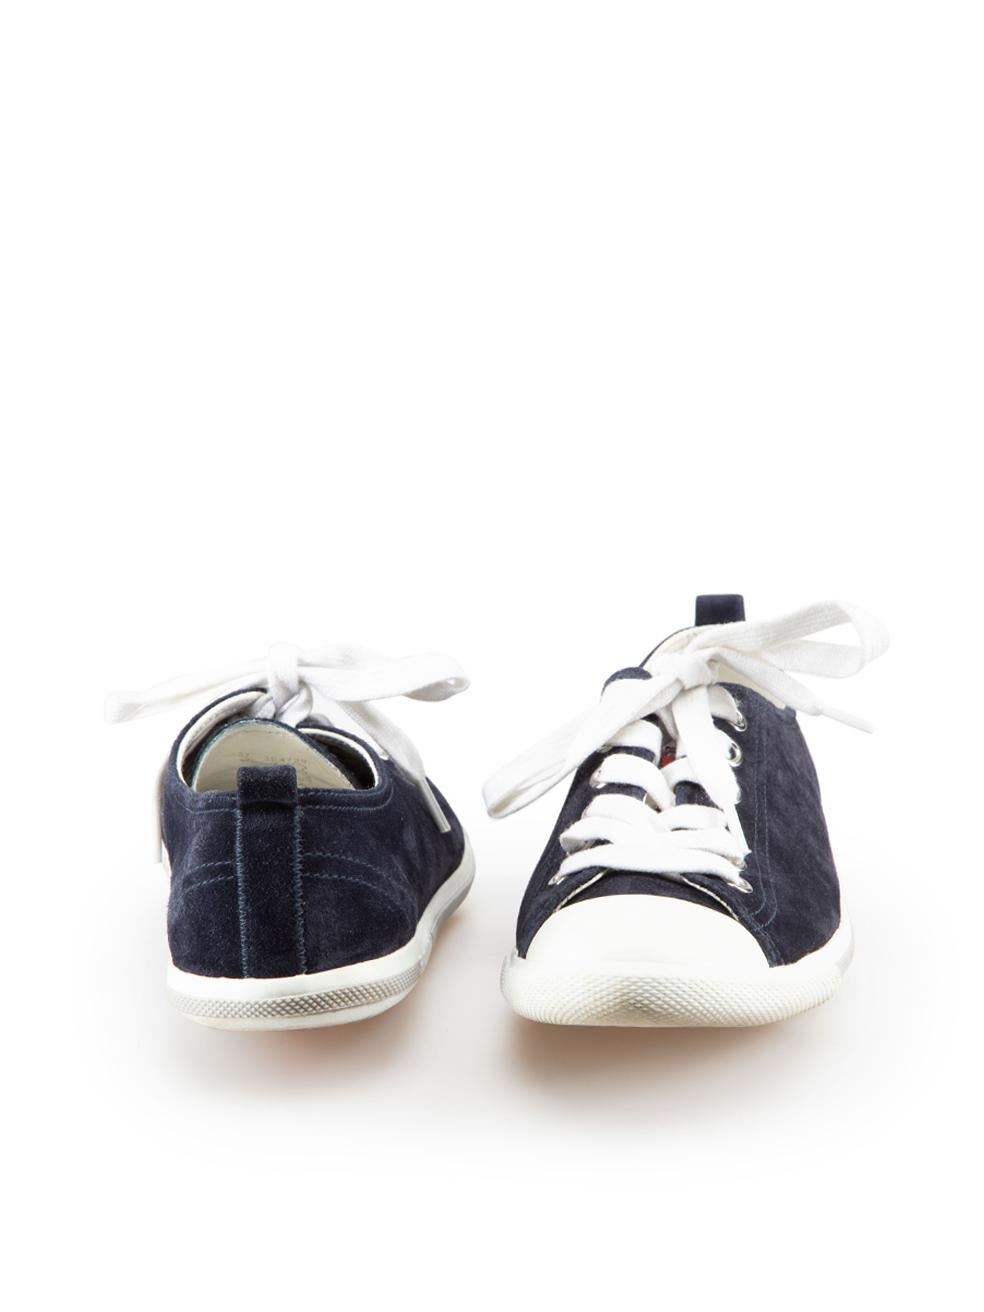 Prada Prada Sport Navy Suede Lace-Up Trainers Size IT 37 In Excellent Condition For Sale In London, GB